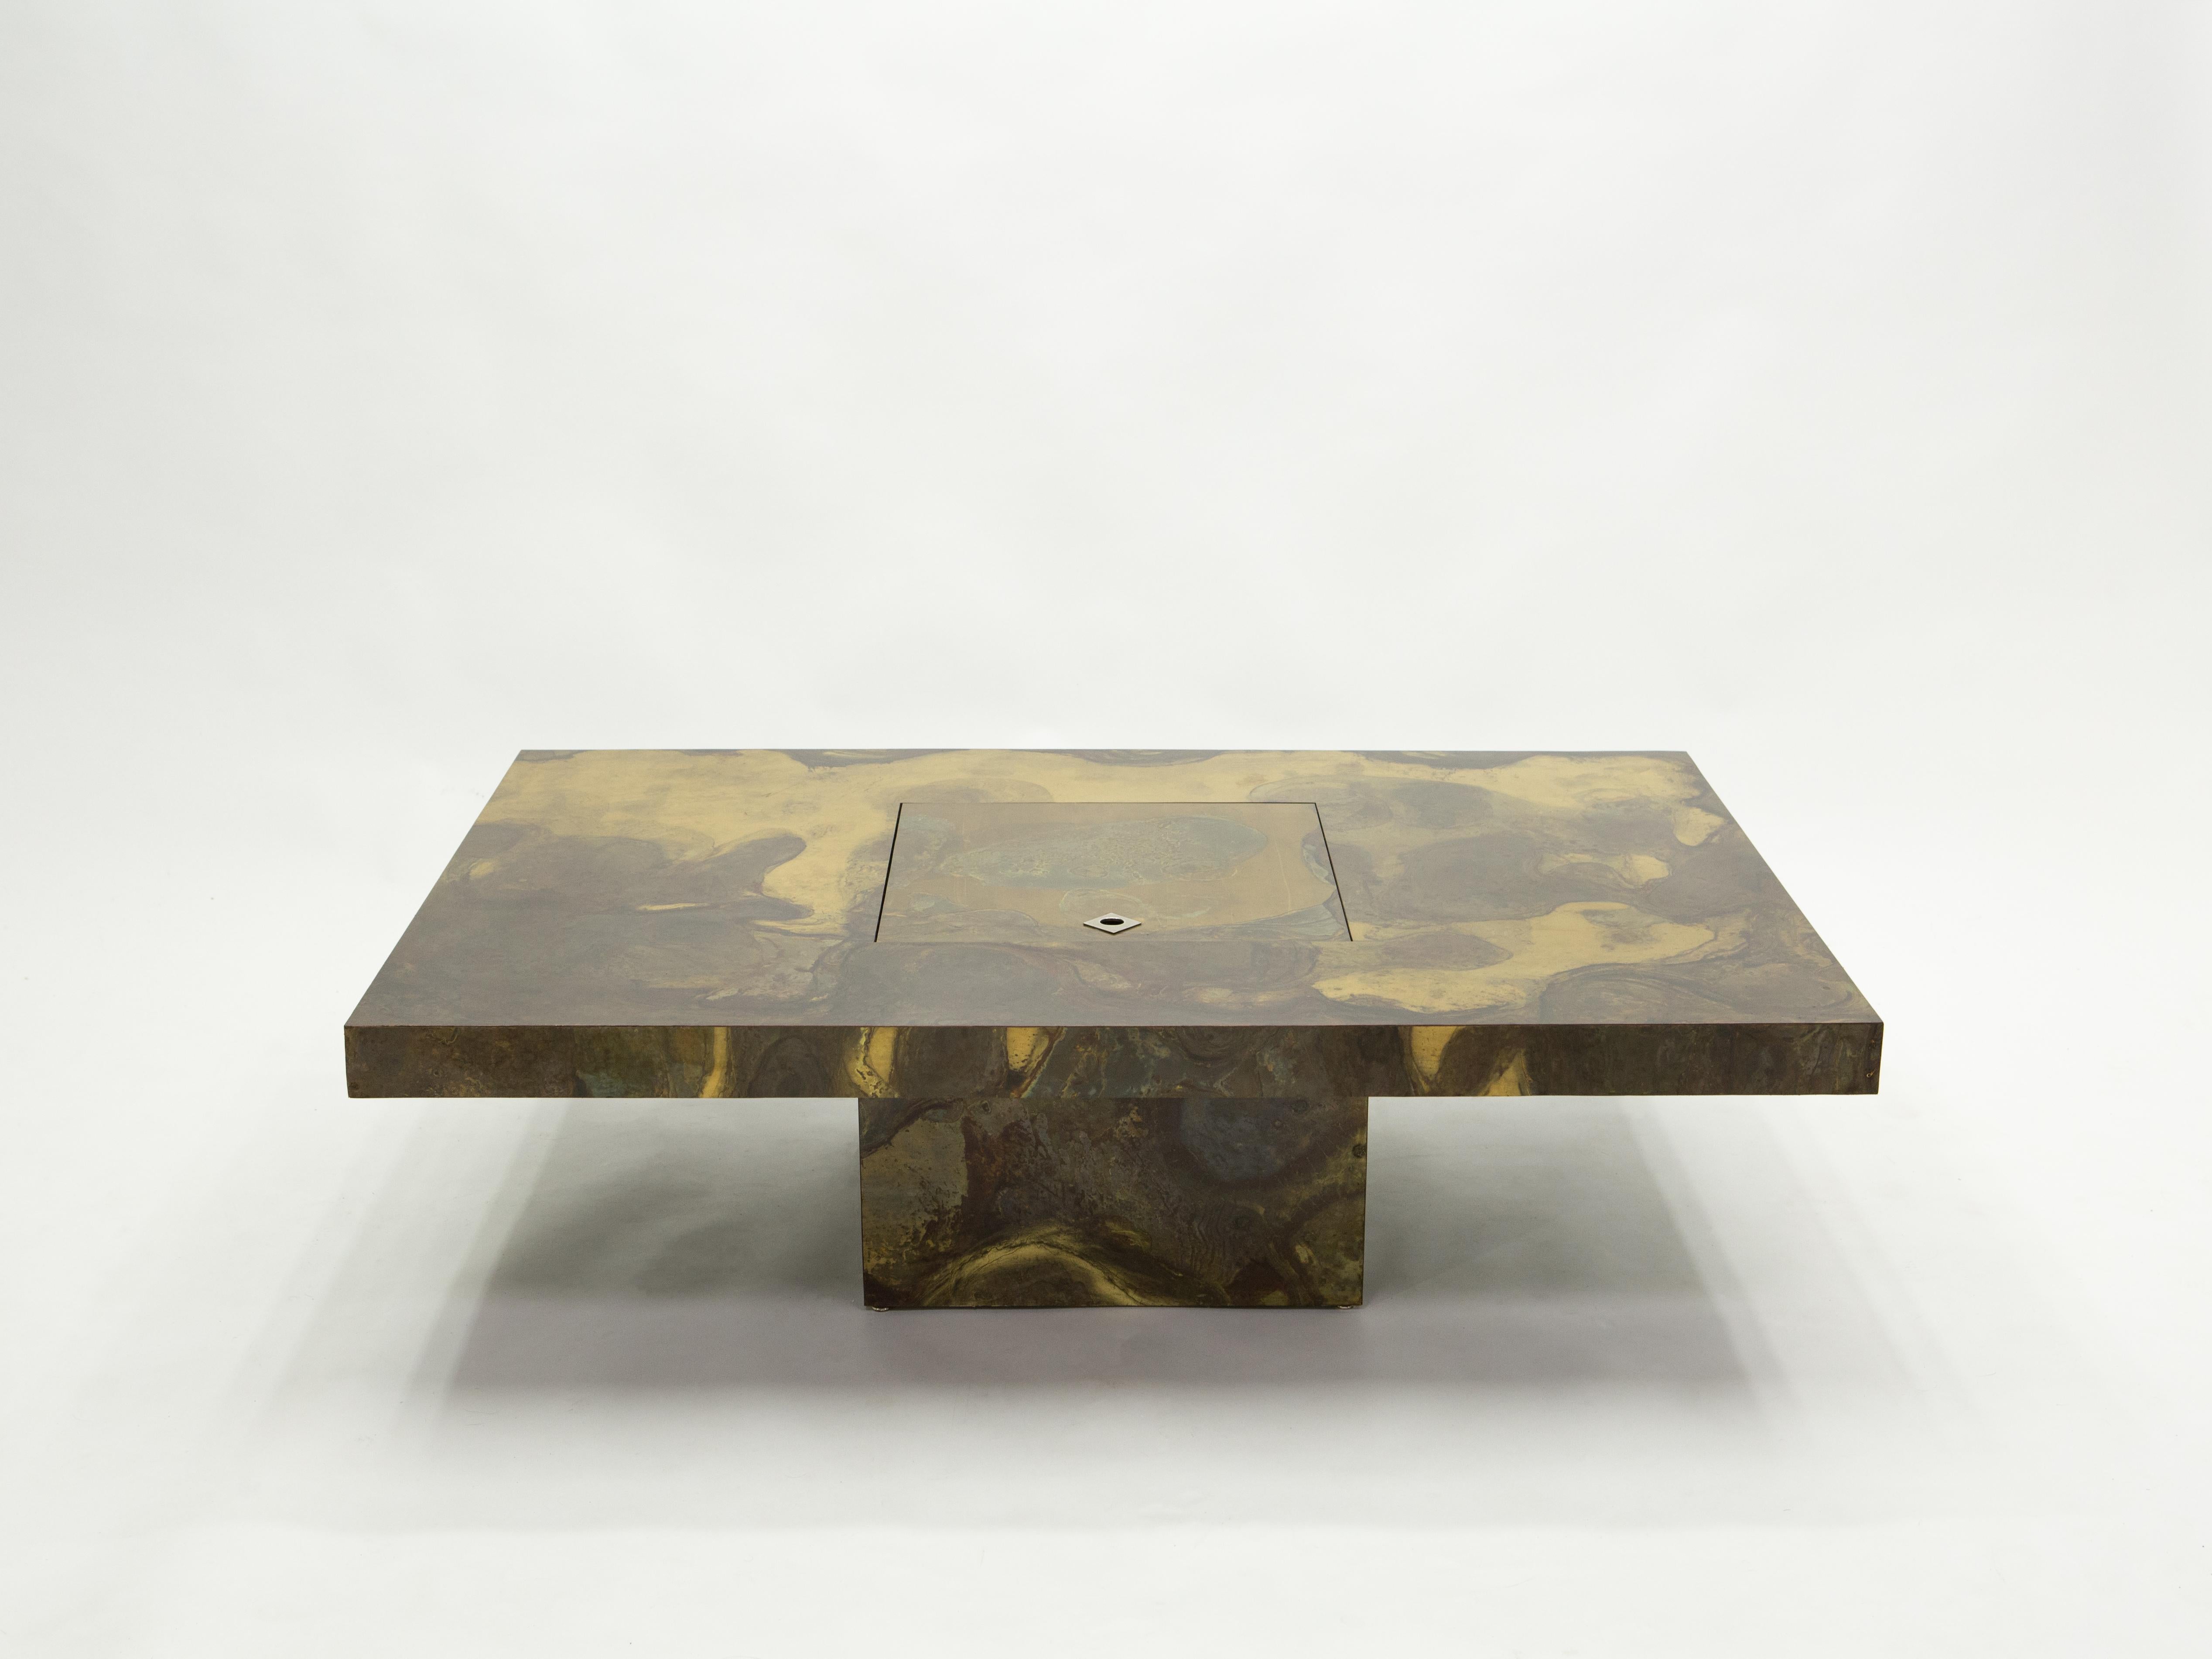 Unique Isabelle and Richard Faure Brass Coffee Table, 1970s For Sale 5